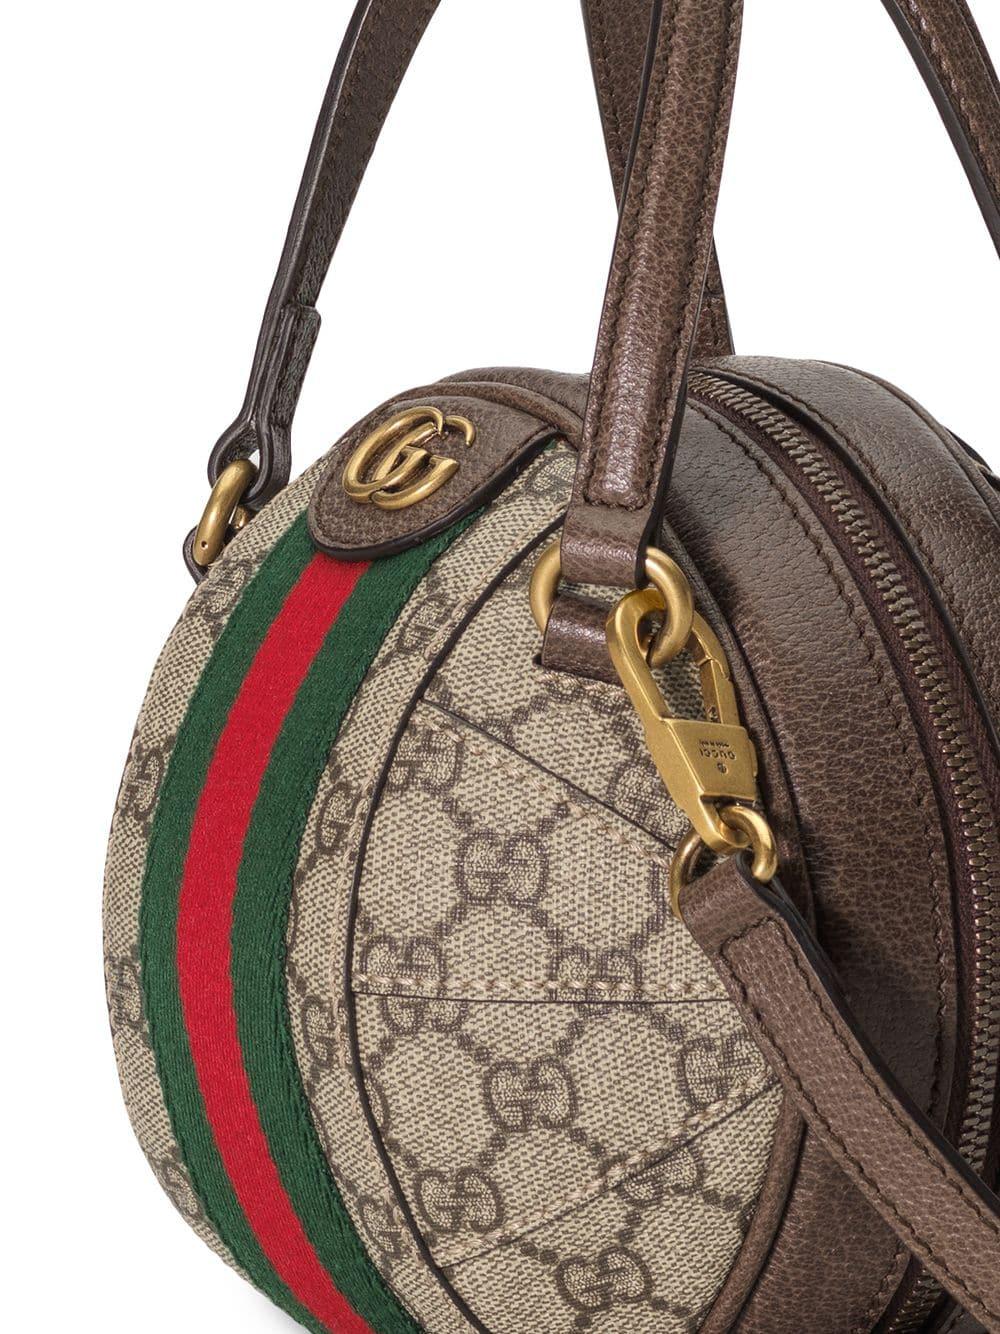 Gucci Canvas Ophidia GG Mini Bag for Men - Lyst